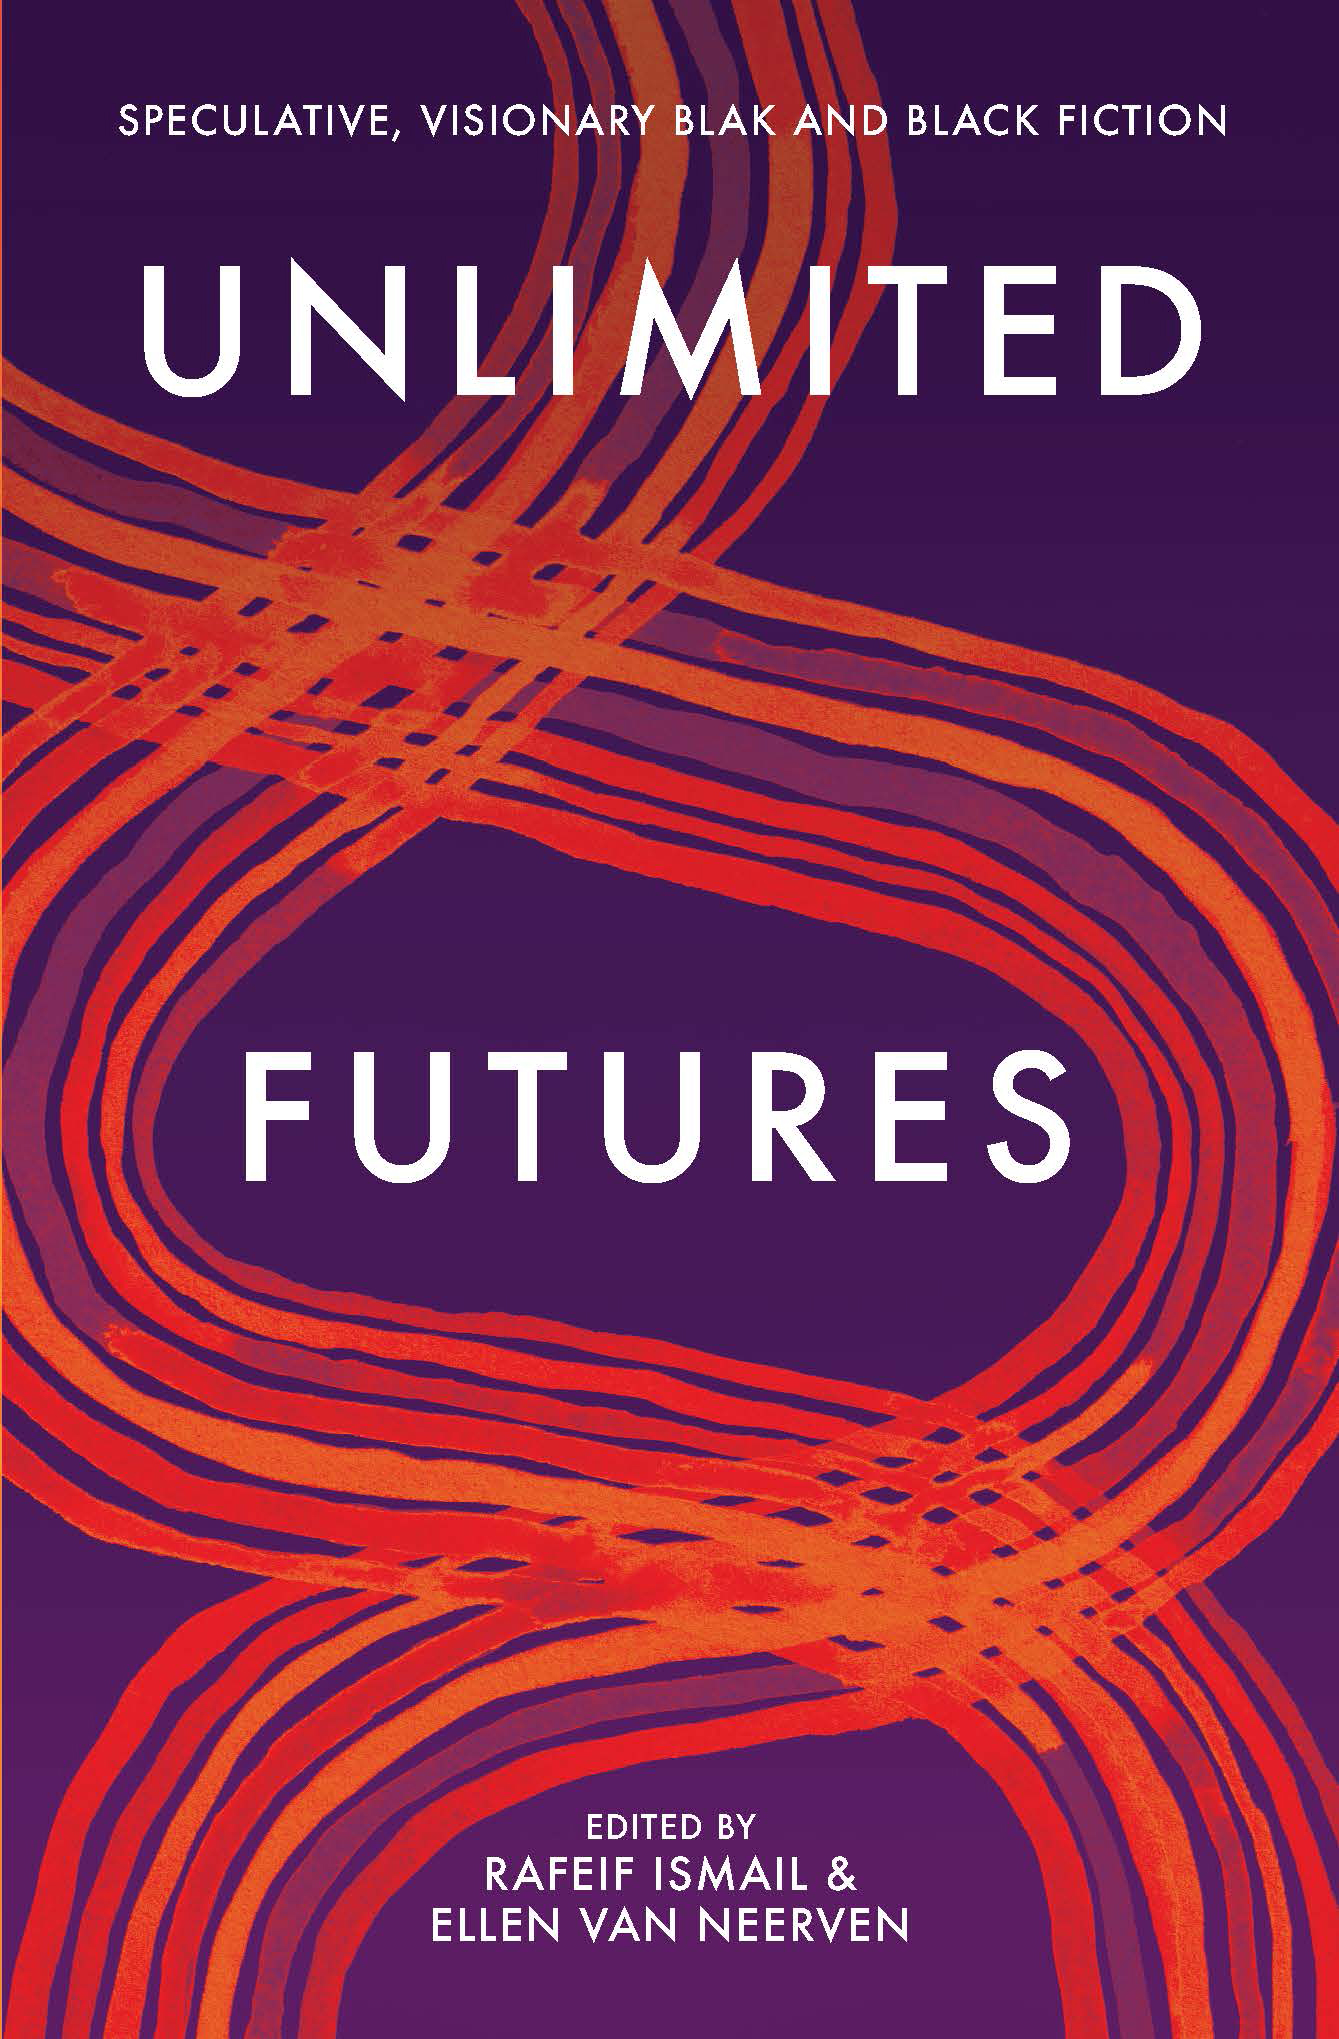 The book cover for Unlimited Futures